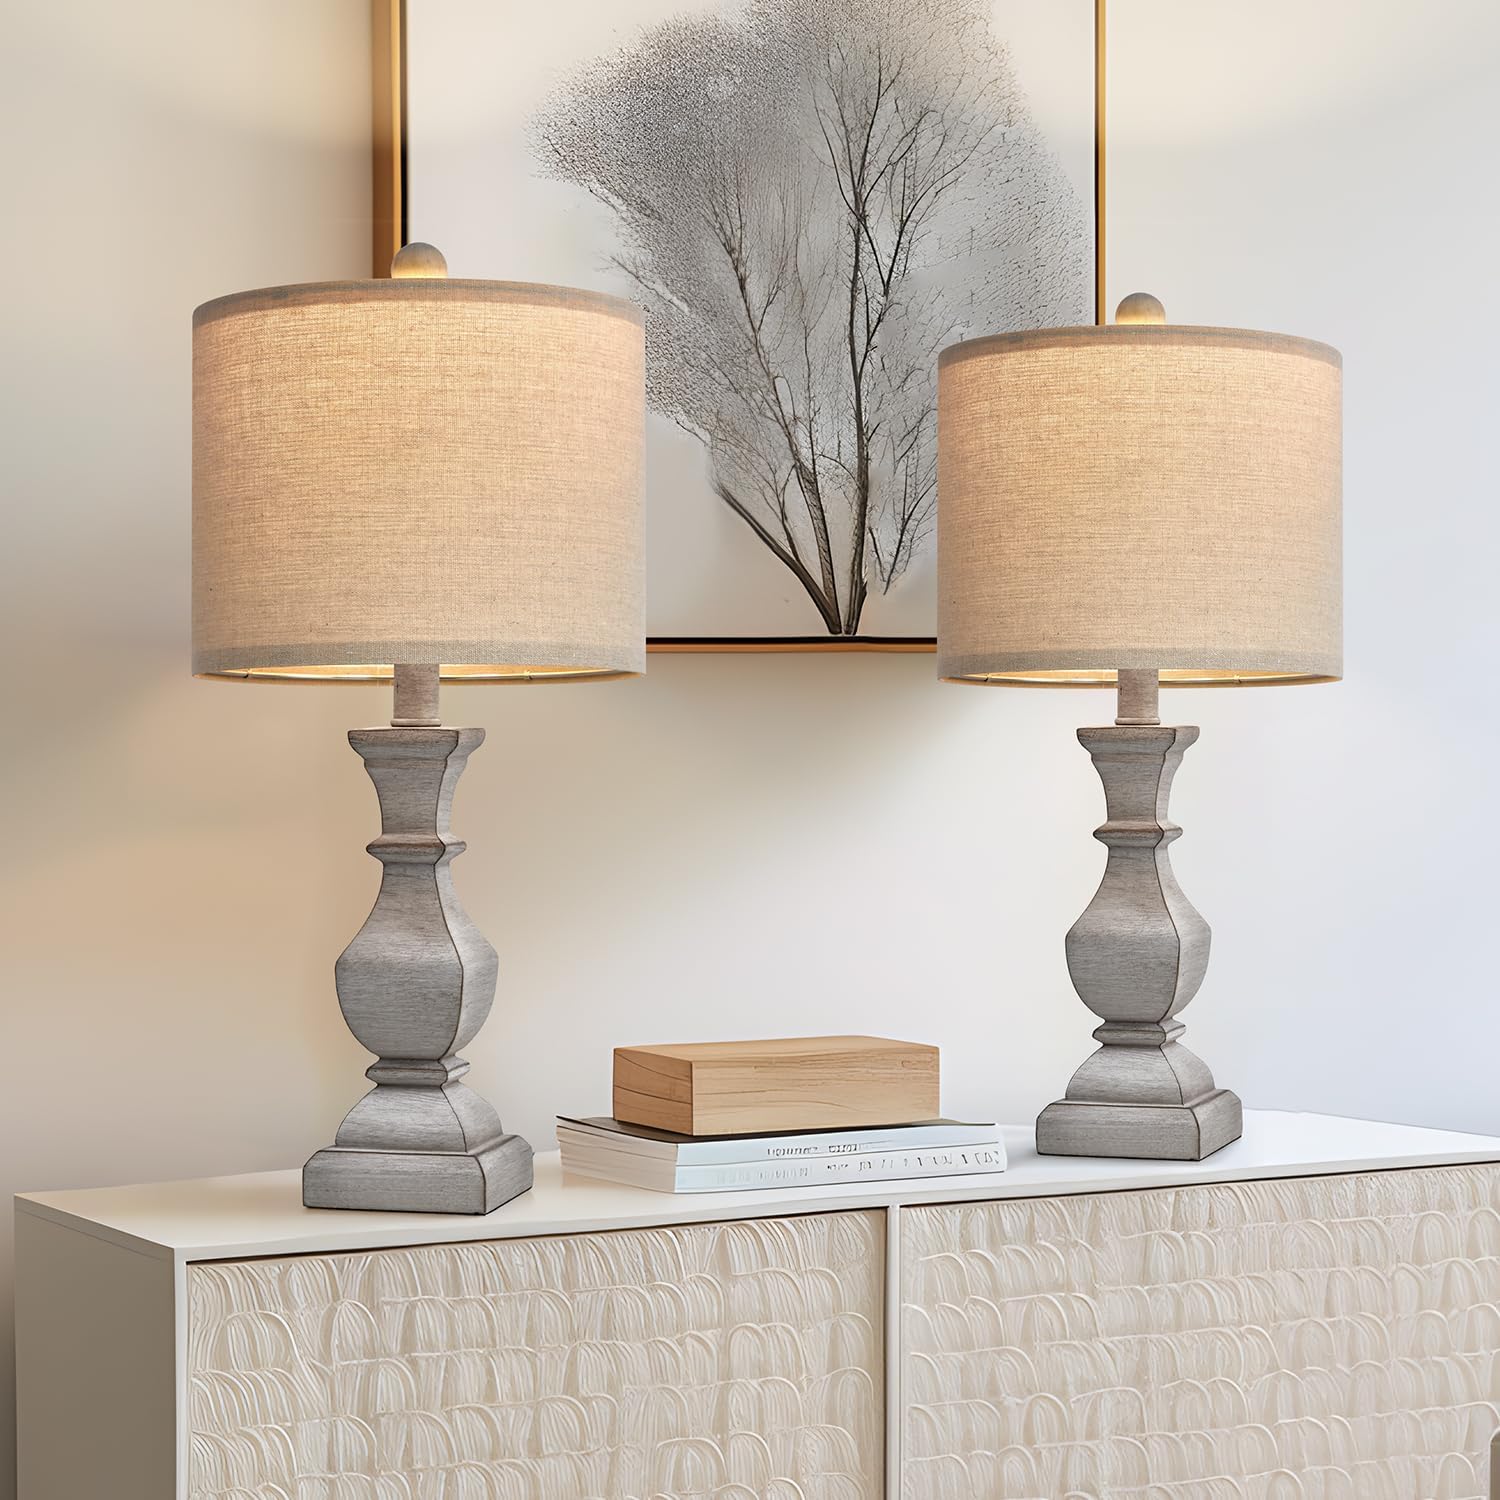 Cute lamps and easy to put together. Quality is good and they are light weight. I love them.